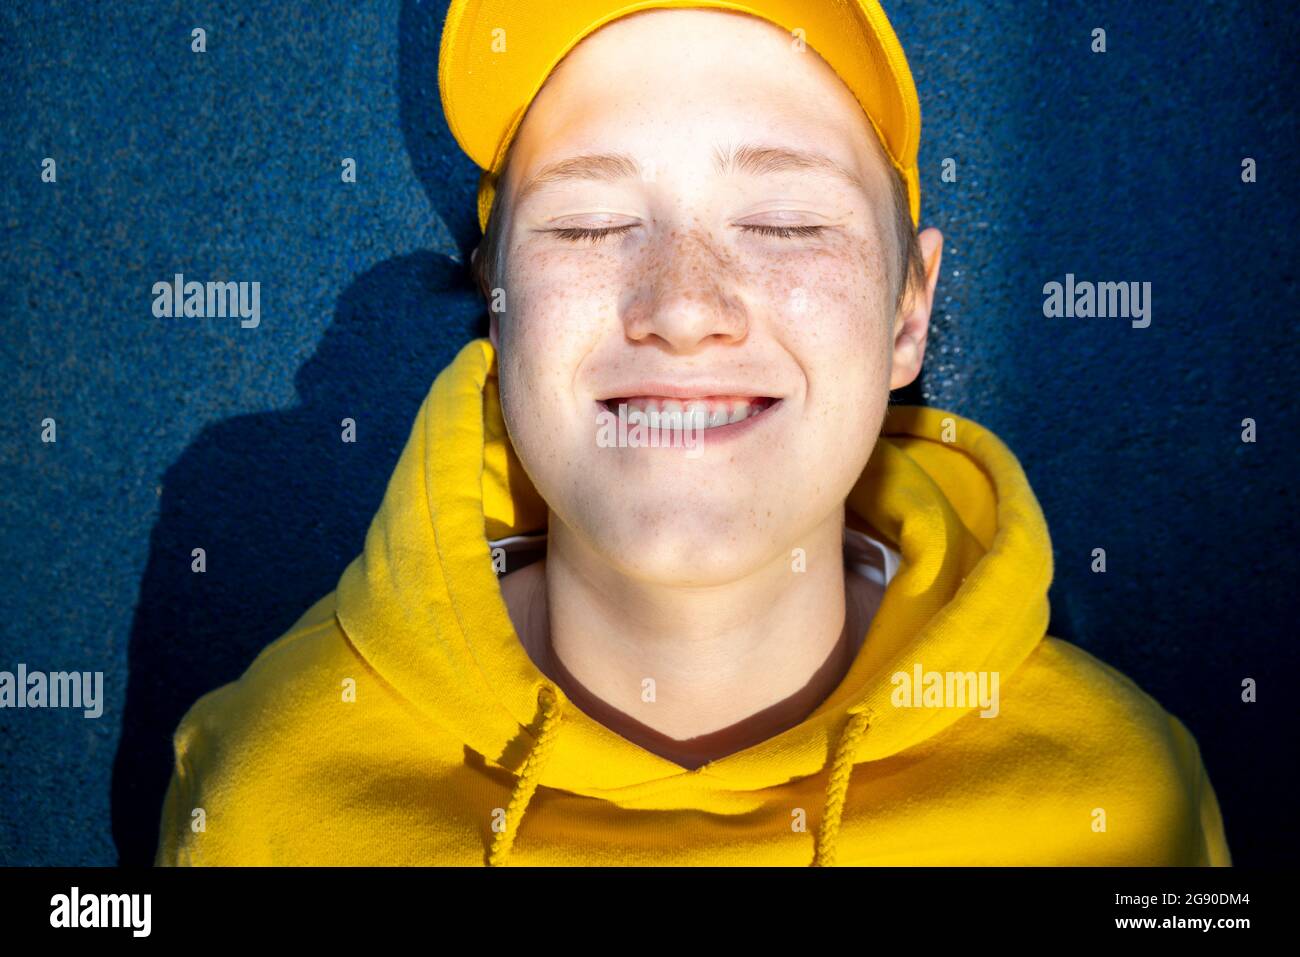 Boy in yellow sweatshirt smiling with eyes closed Stock Photo